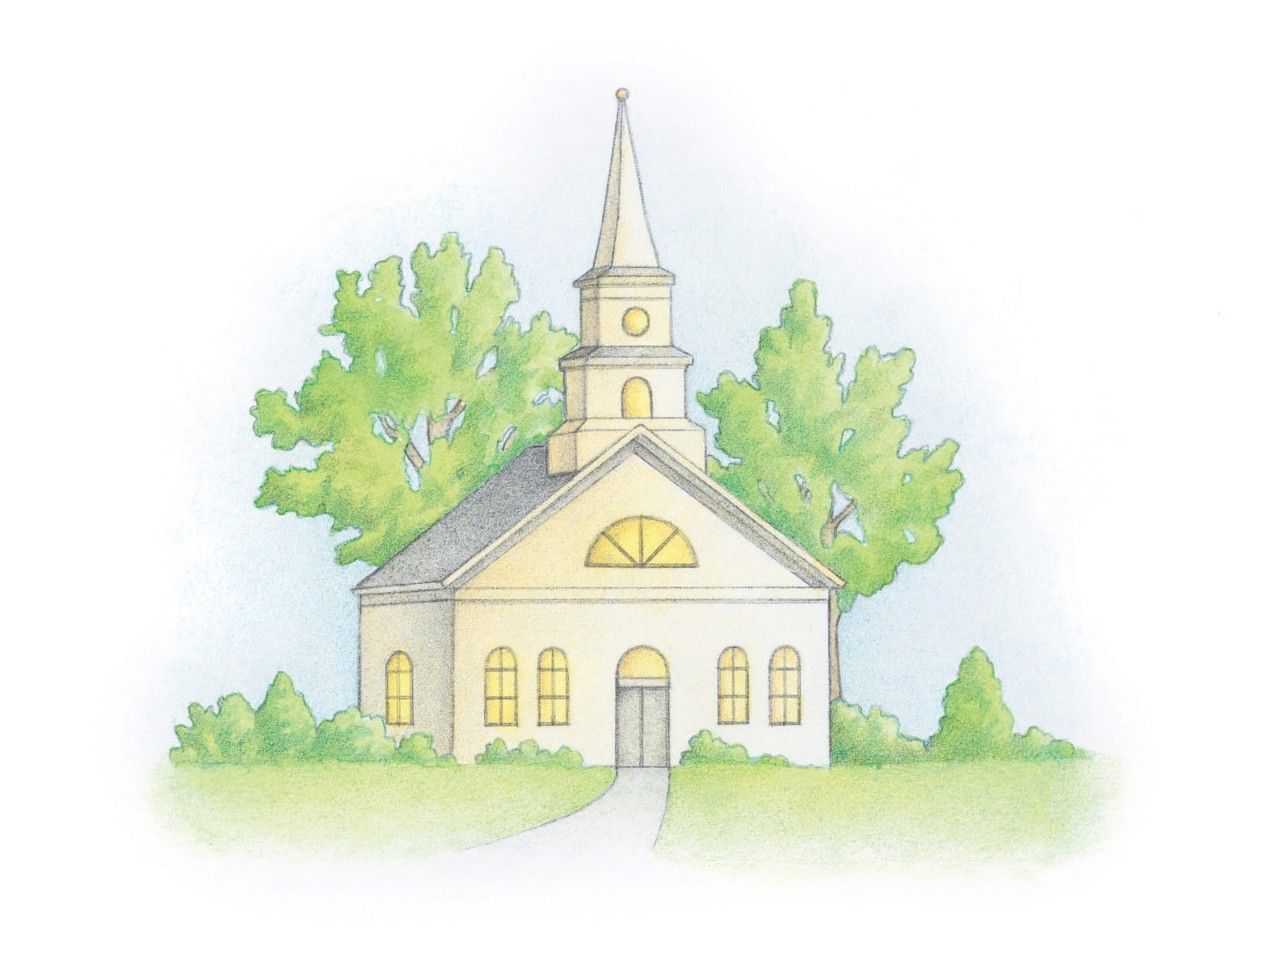 A white meetinghouse among the trees. From the Children’s Songbook, page 130, “The Eleventh Article of Faith”; watercolor illustration by Beth Whittaker.